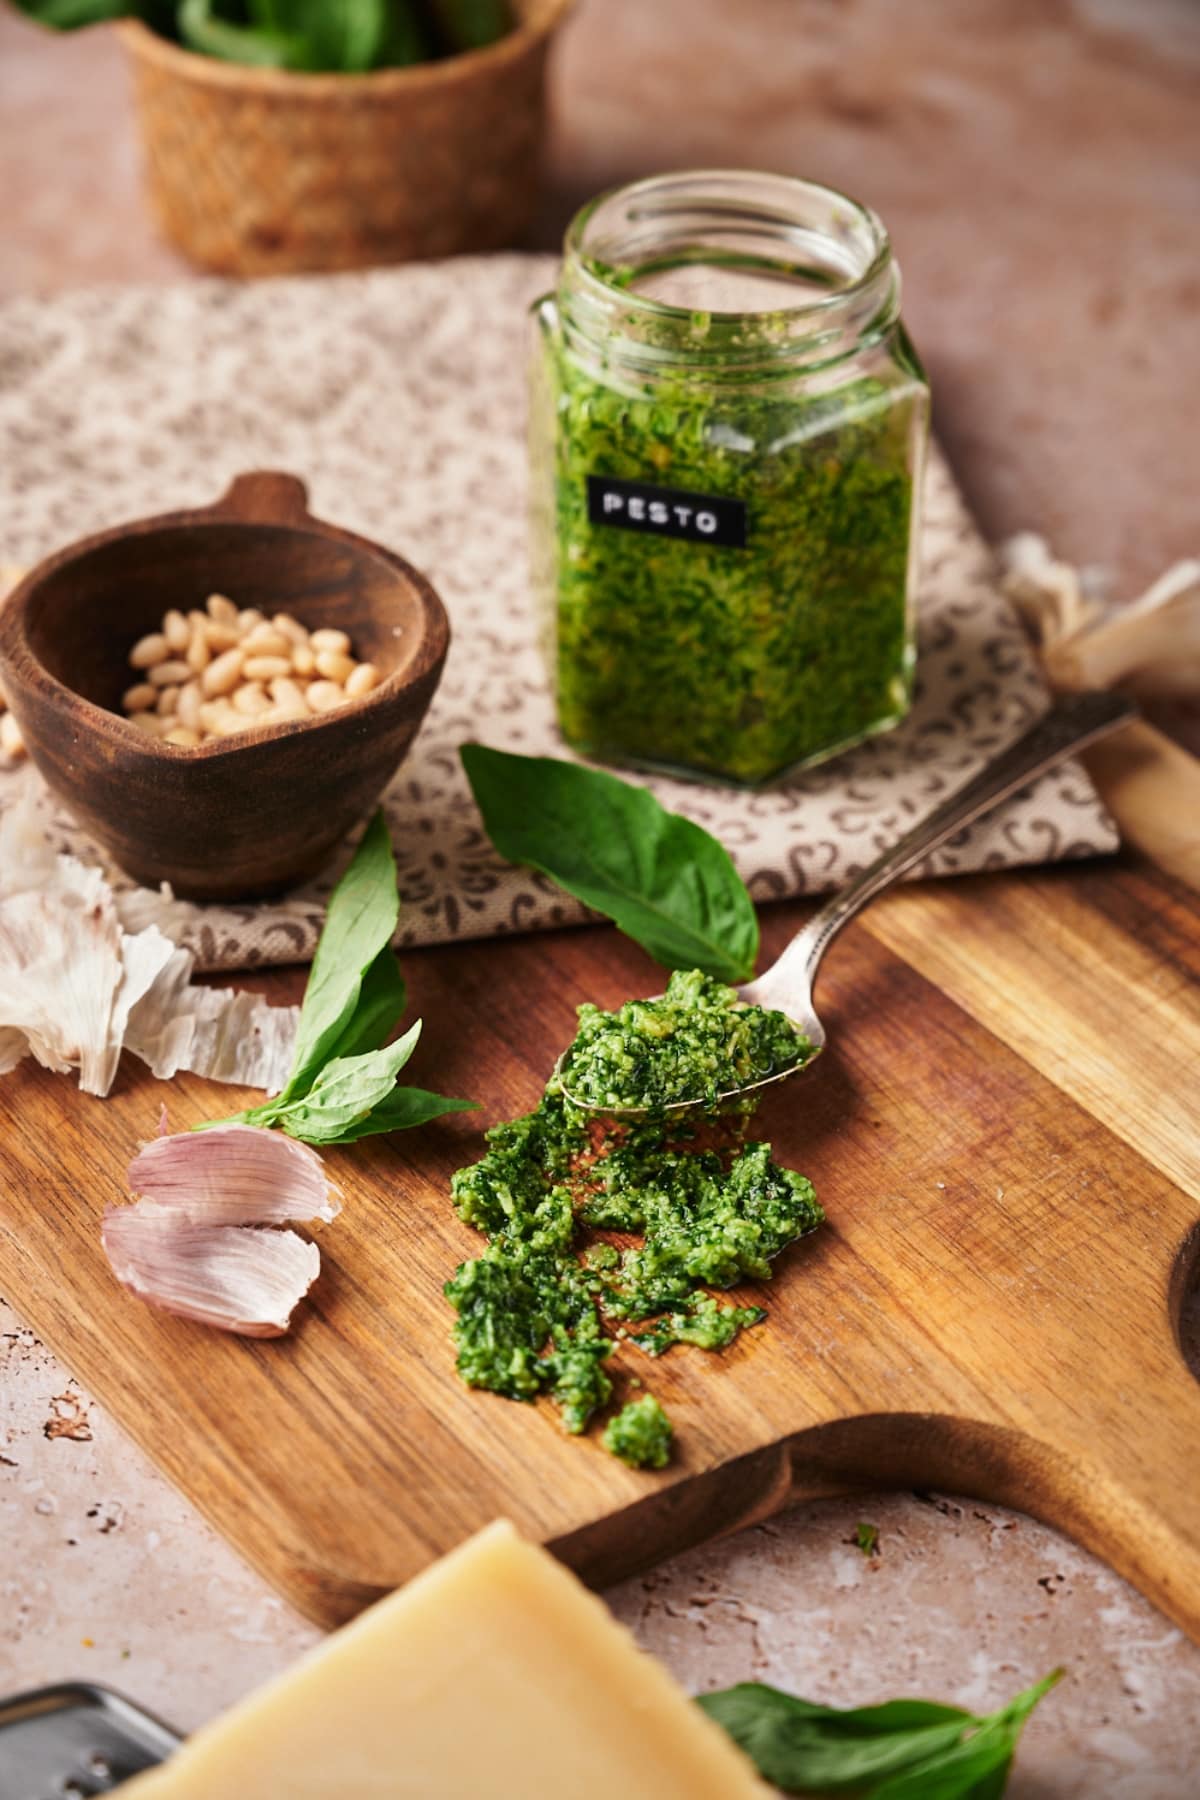 clear jar of basil pesto with a black label with white text labeled pesto. beside a pestle with pine nuts inside. some fresh basil leaves and garlic peel scattered around. and a spoon of pesto.